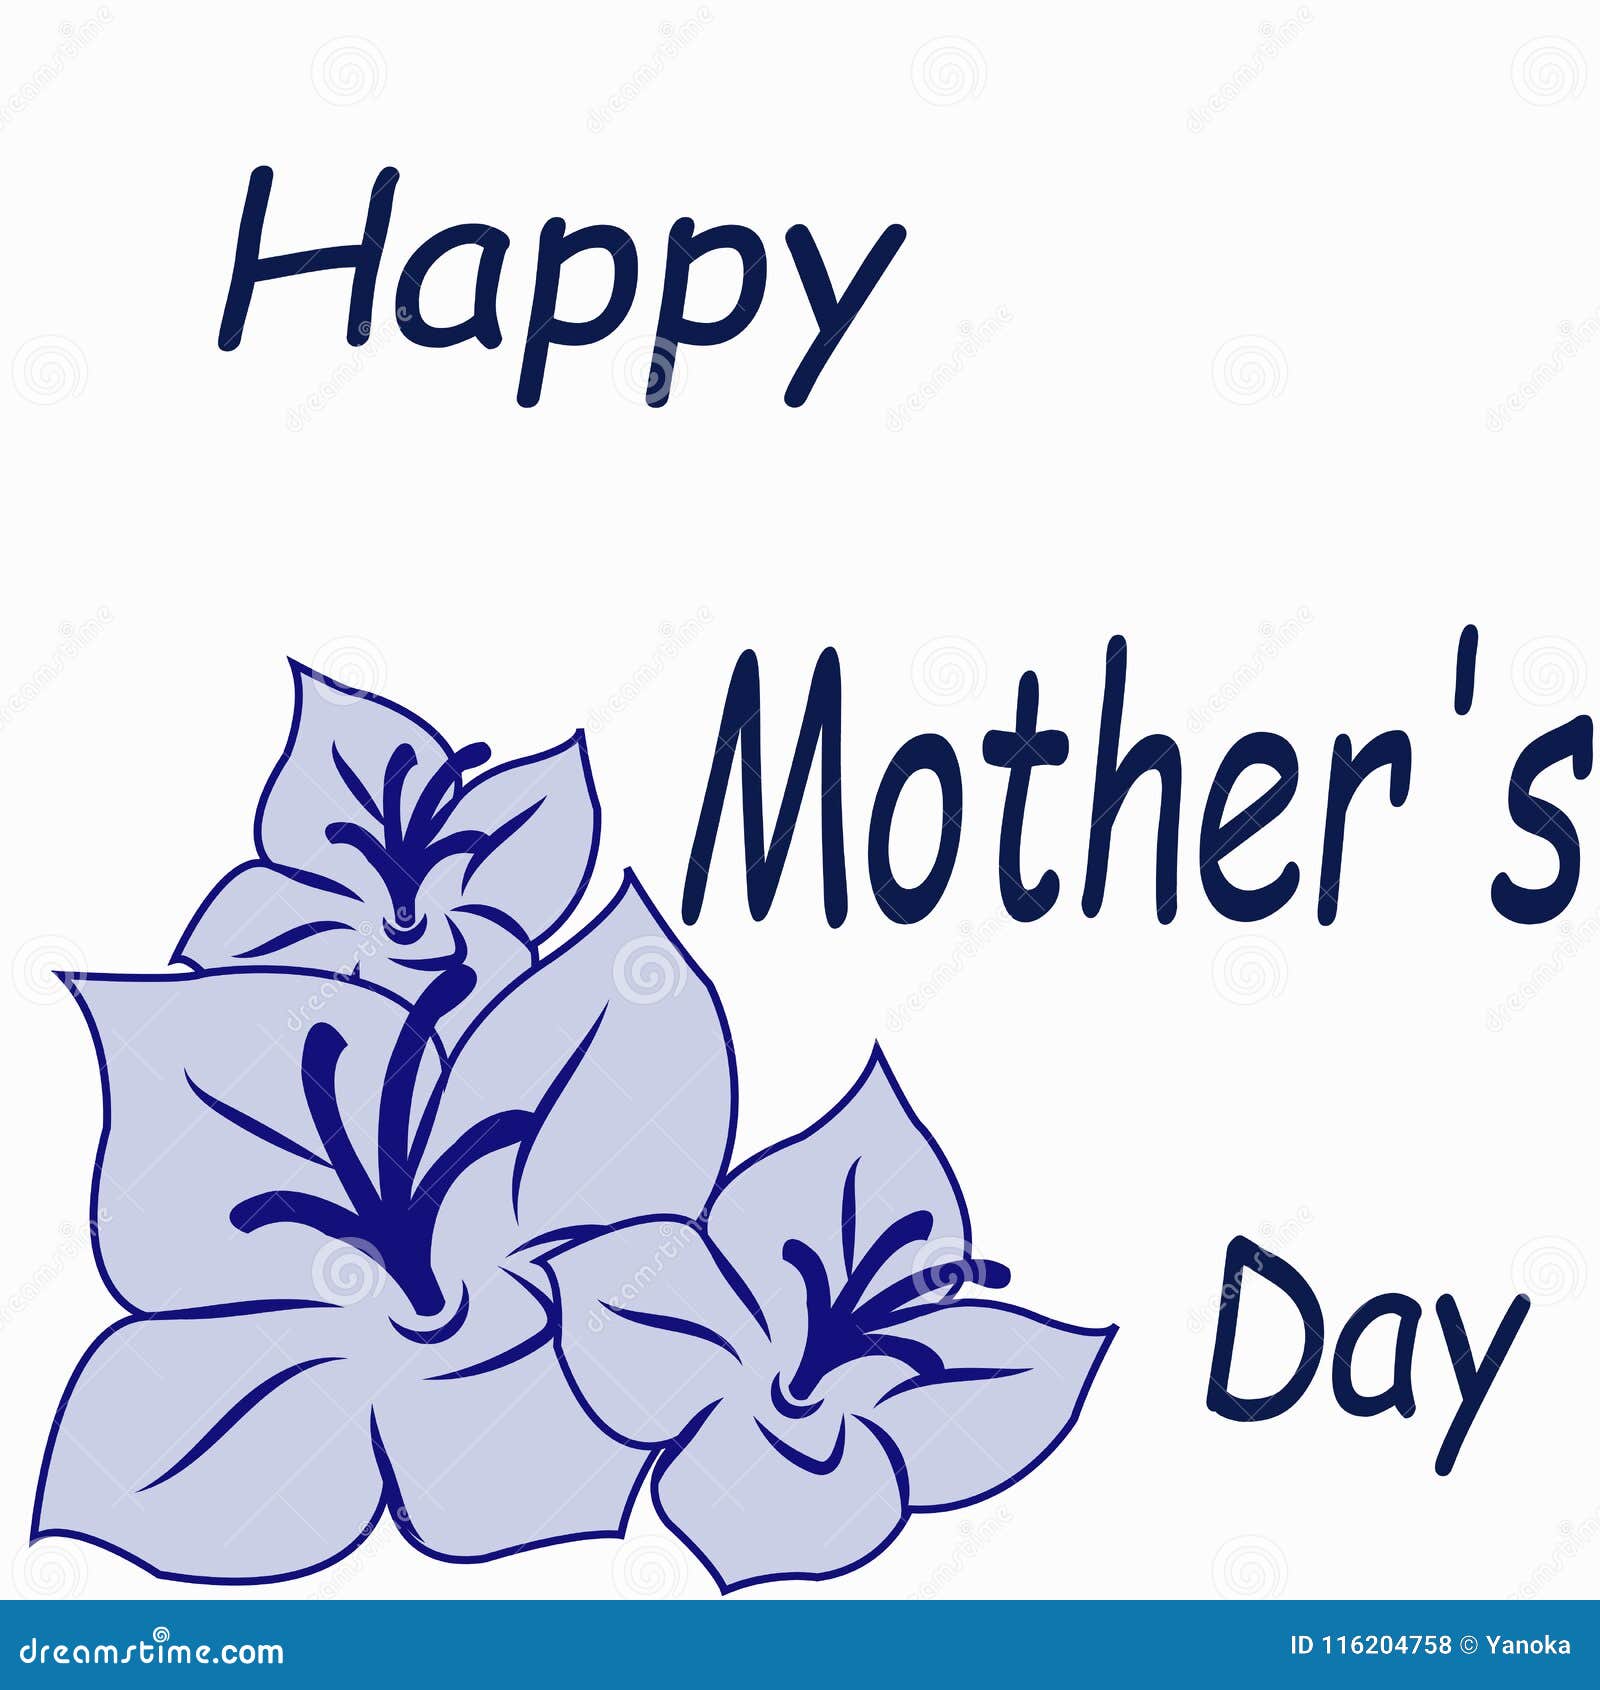 Mother S Day Card with Blue Flowers Stock Vector - Illustration of ...